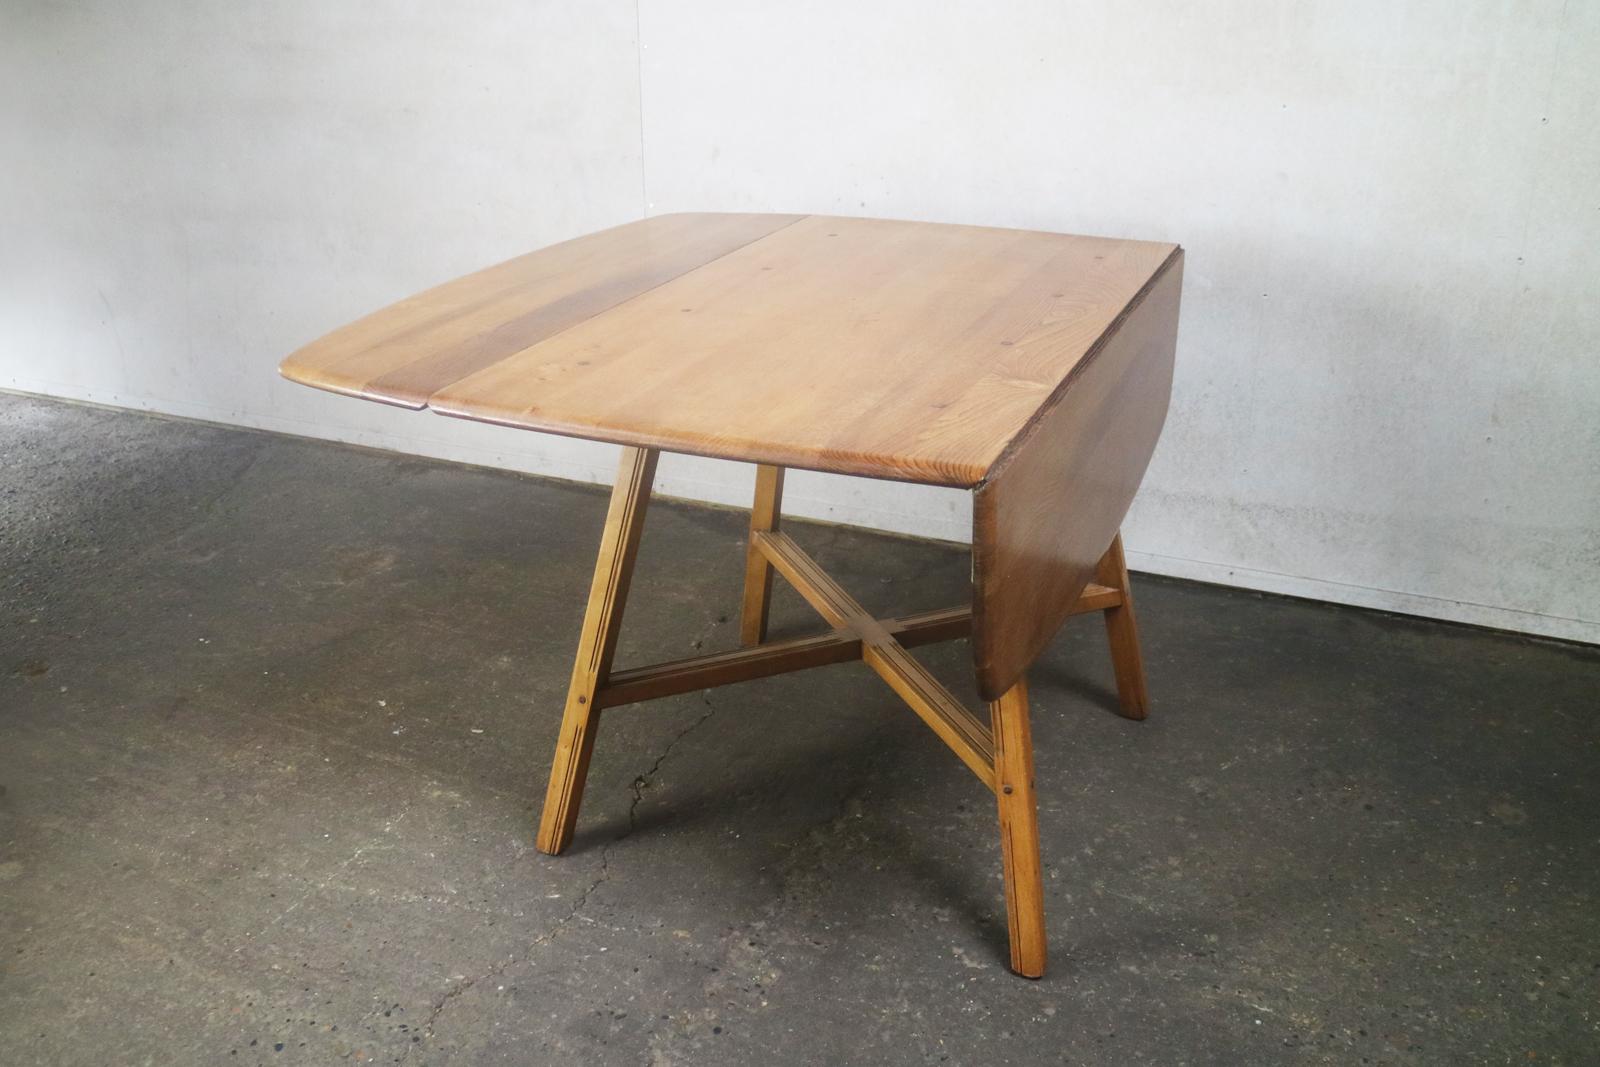 The Ercol Old Colonial table is an earlier and more rare design than the more recent Ercol drop-leaf table. It has a more detailed support frame and the substantial ‘bolt’ system for supporting the table flaps (see photograph).